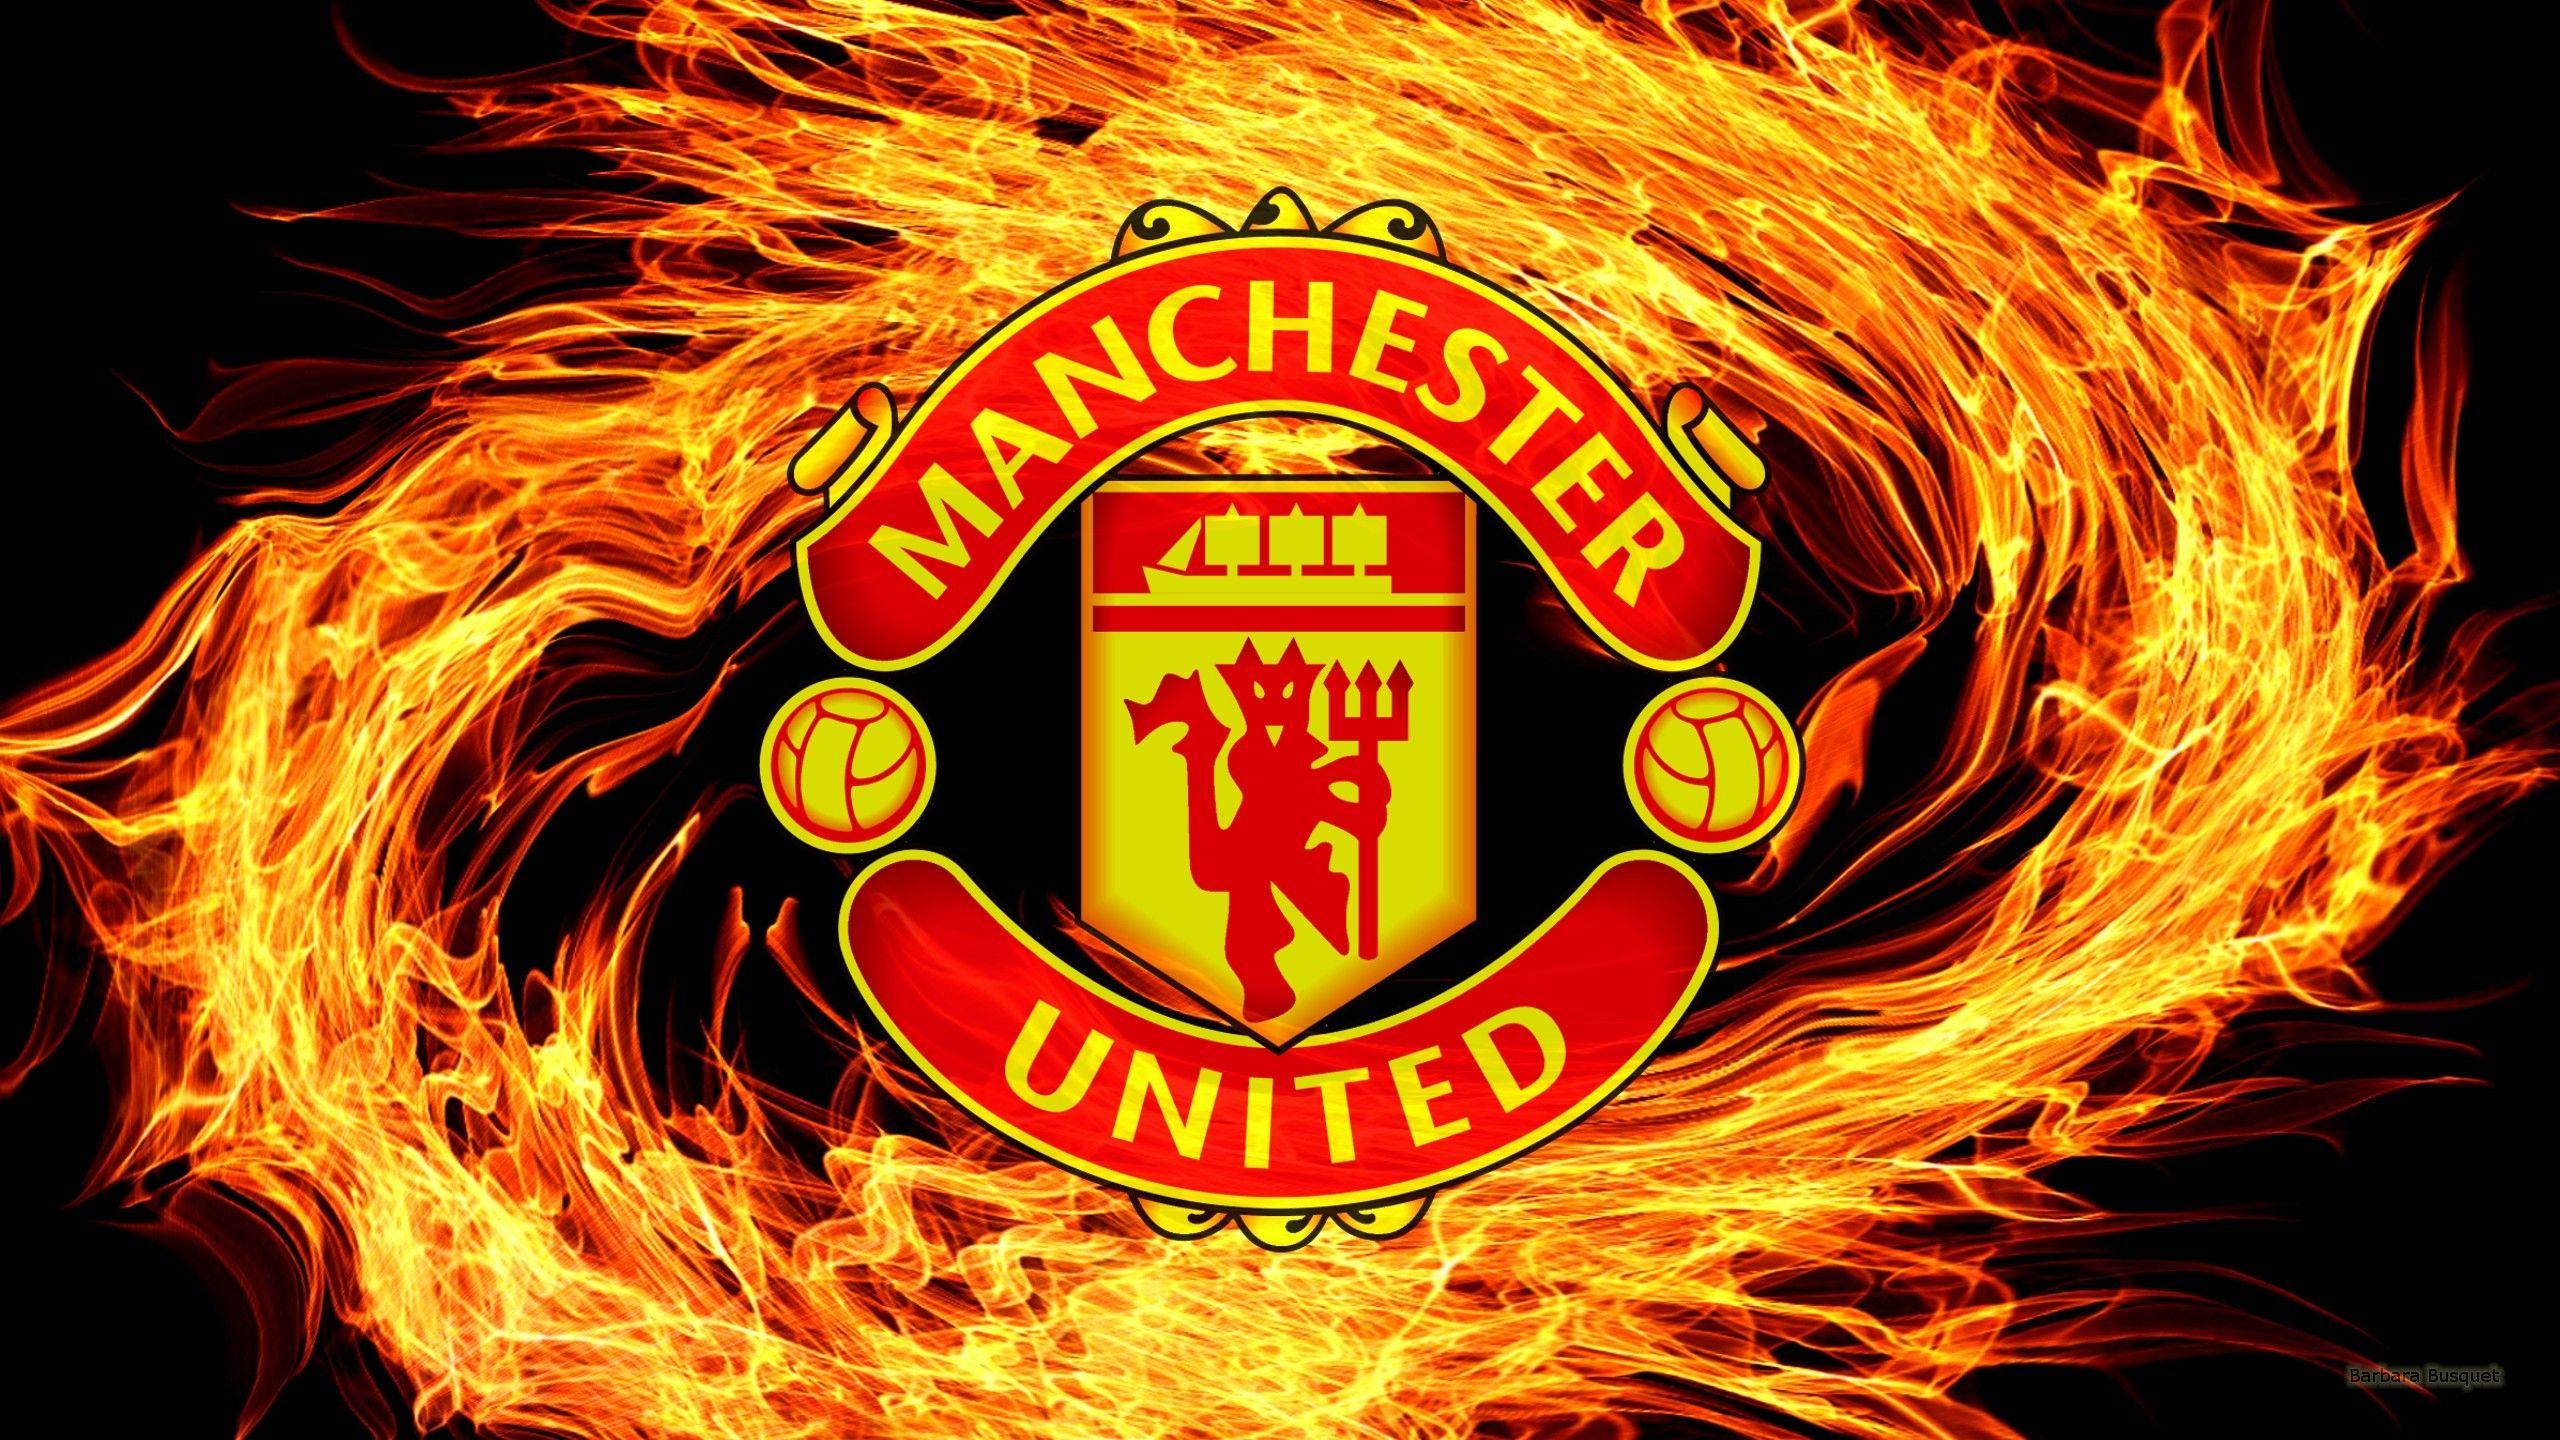 Glory Manchester United Background Wallpaper Windows 10 Wallpapers